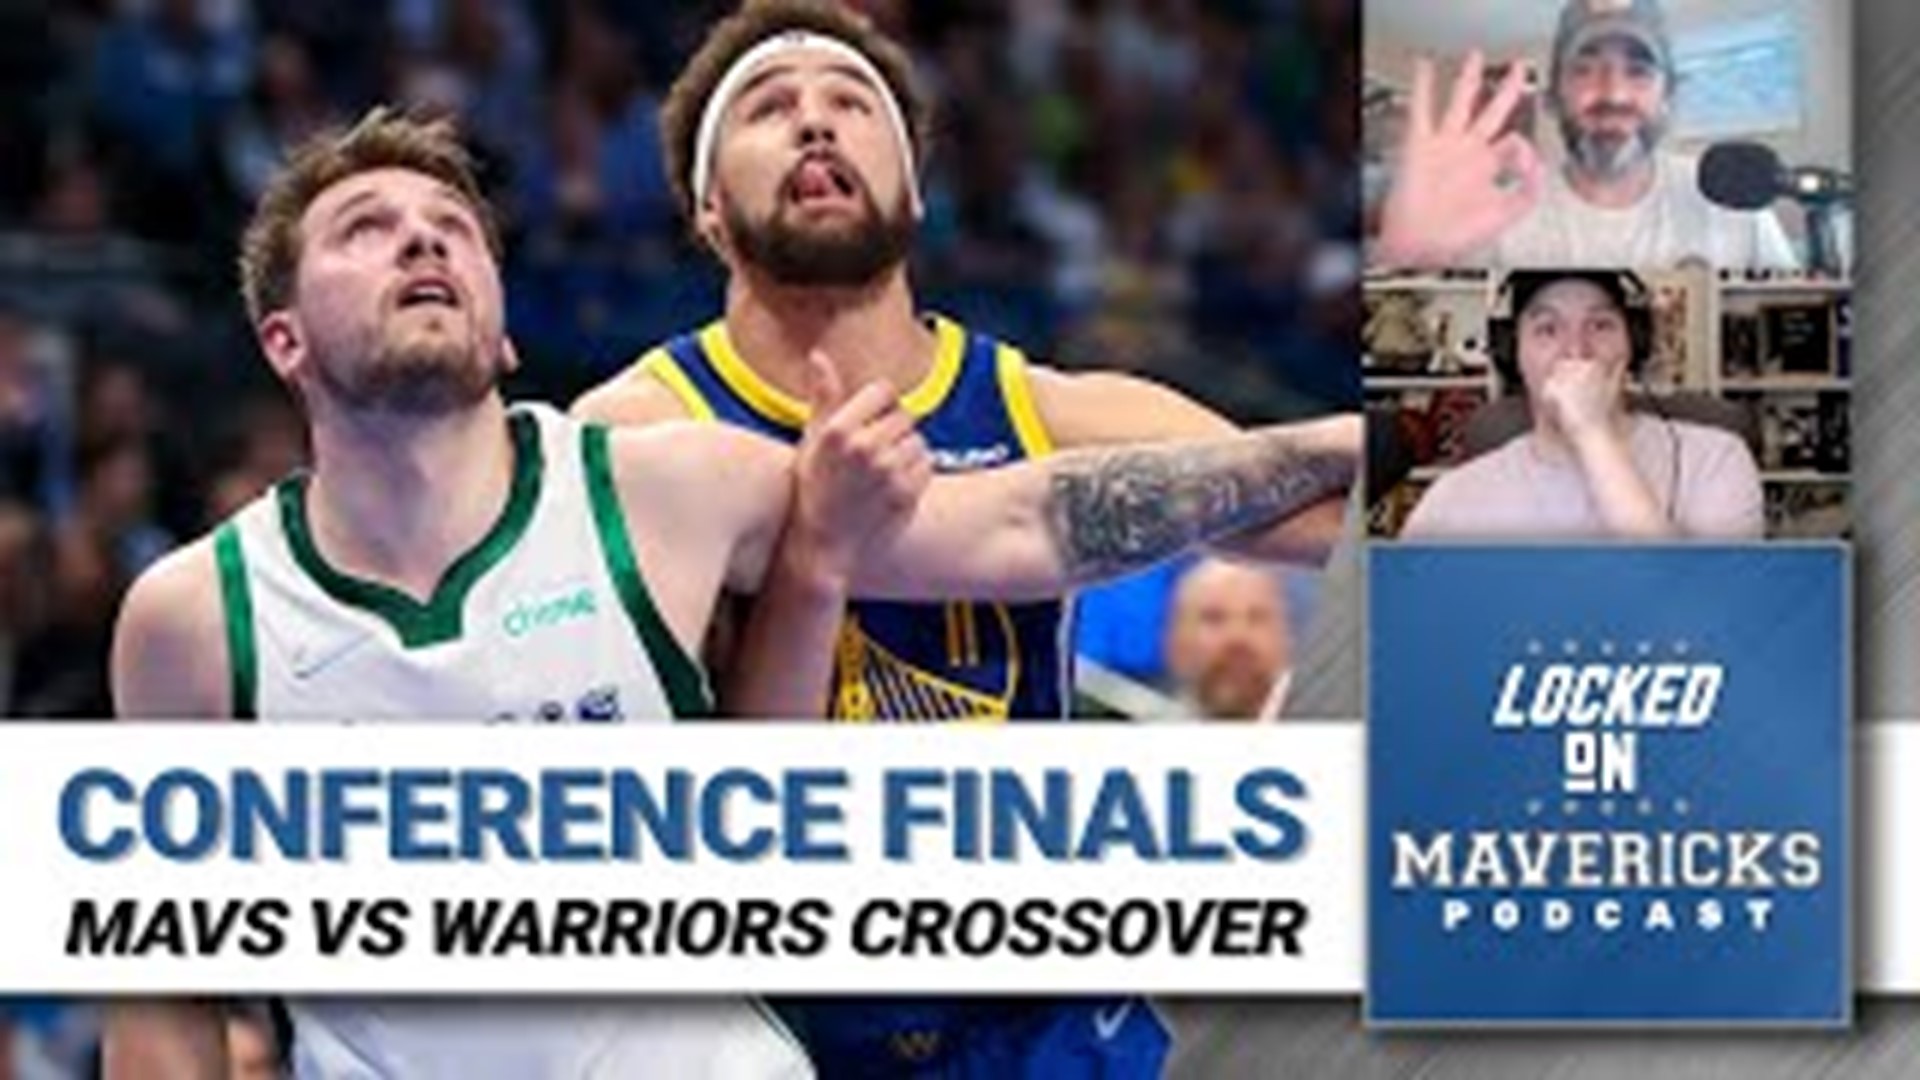 Nick Angstadt is joined by Cyrus Saatsaz of Locked On Warriors to discuss the Western Conference Finals.